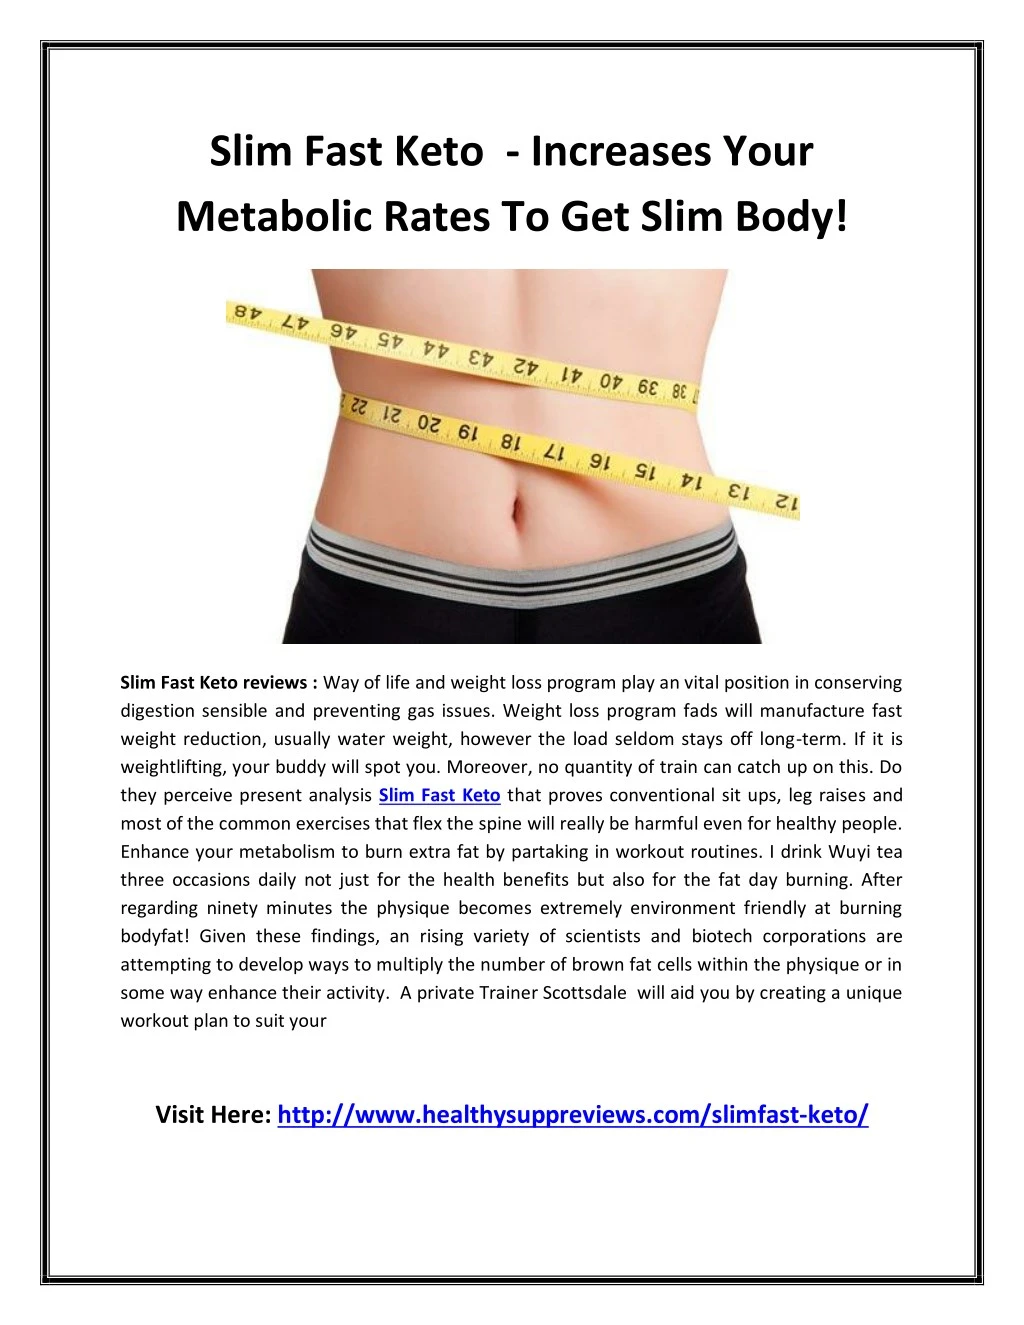 slim fast keto increases your metabolic rates